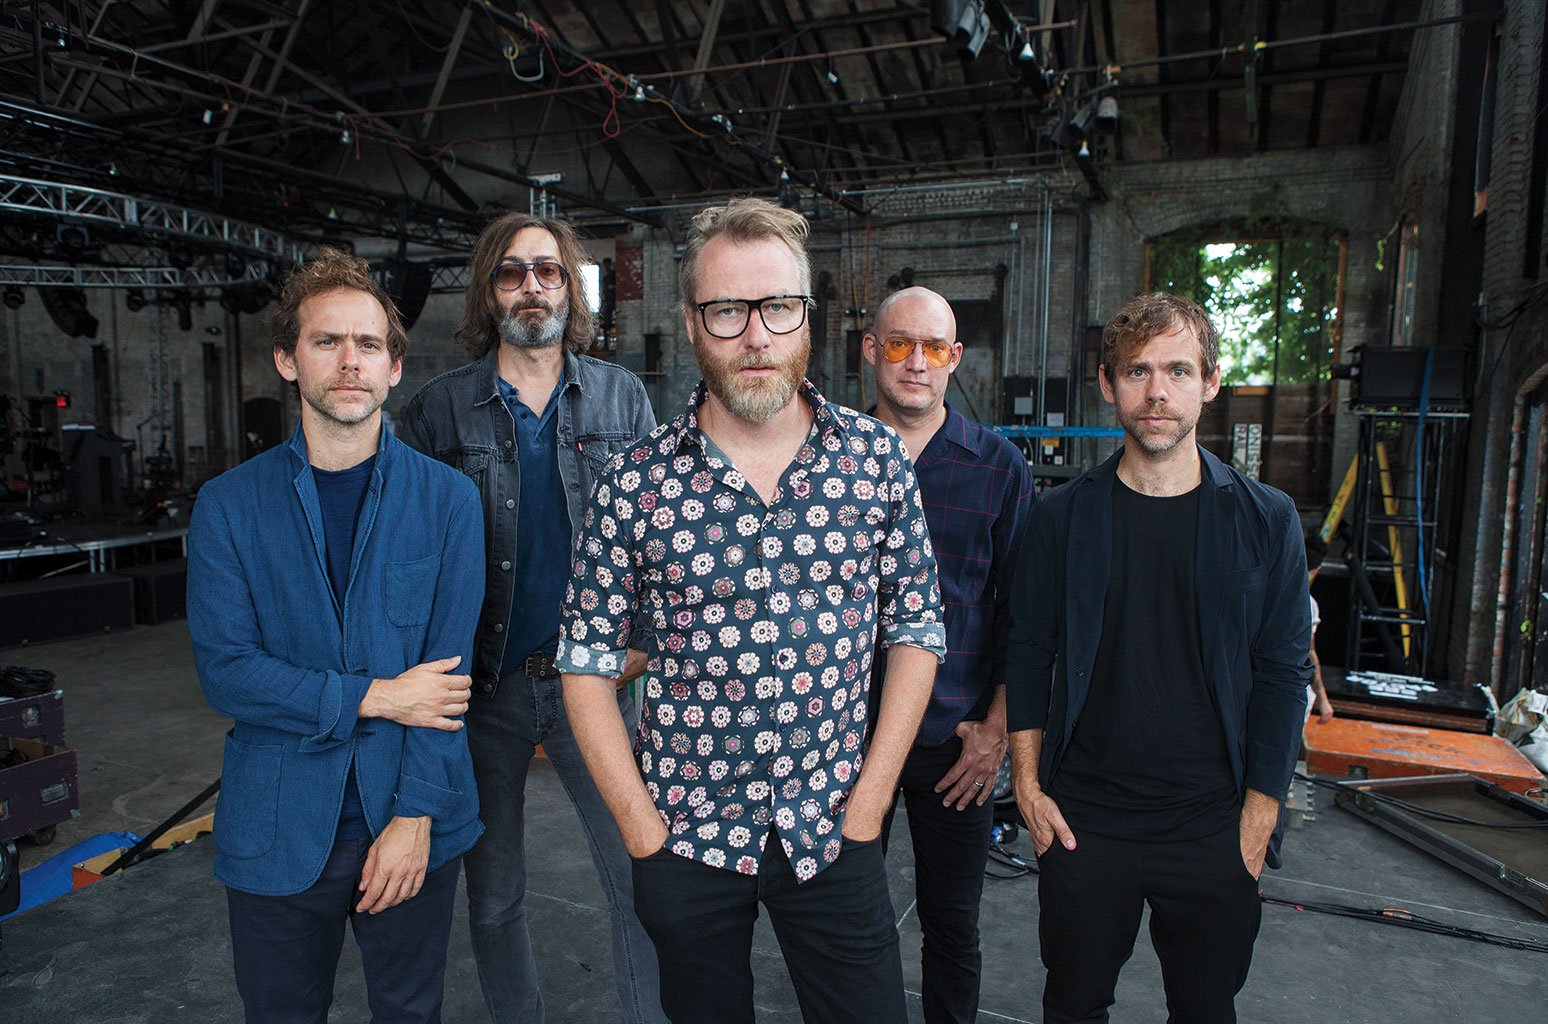 The National at Ascend Amphitheater